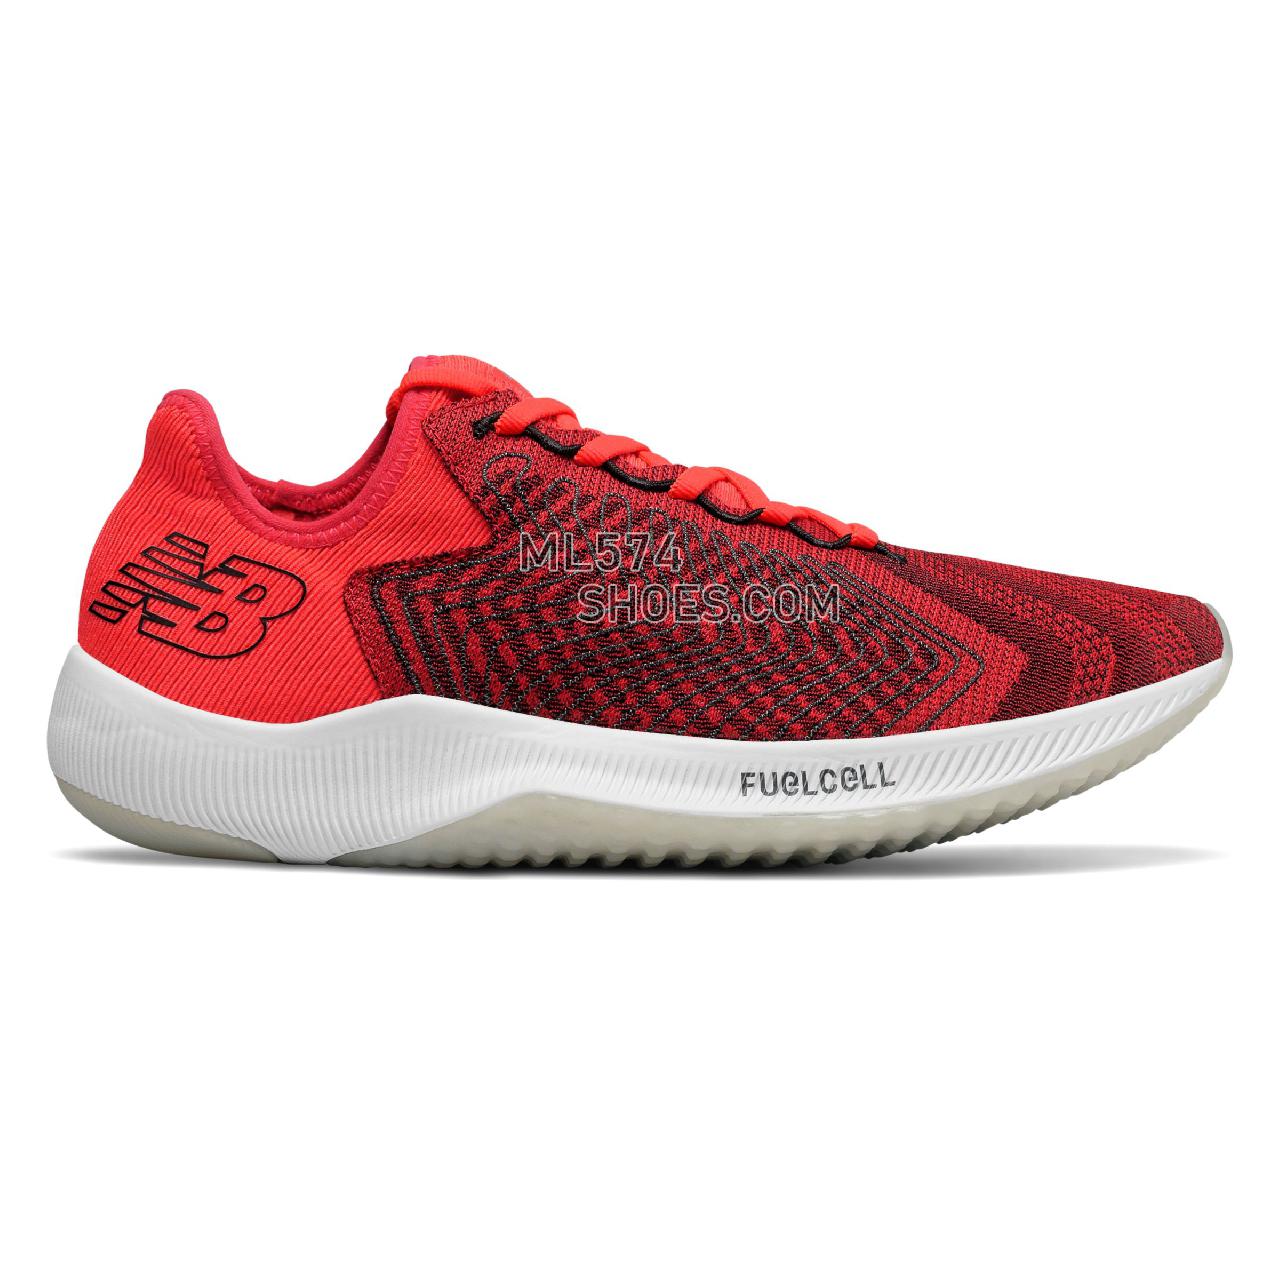 New Balance FuelCell Rebel - Men's Neutral Running - Energy Red with Black - MFCXRW